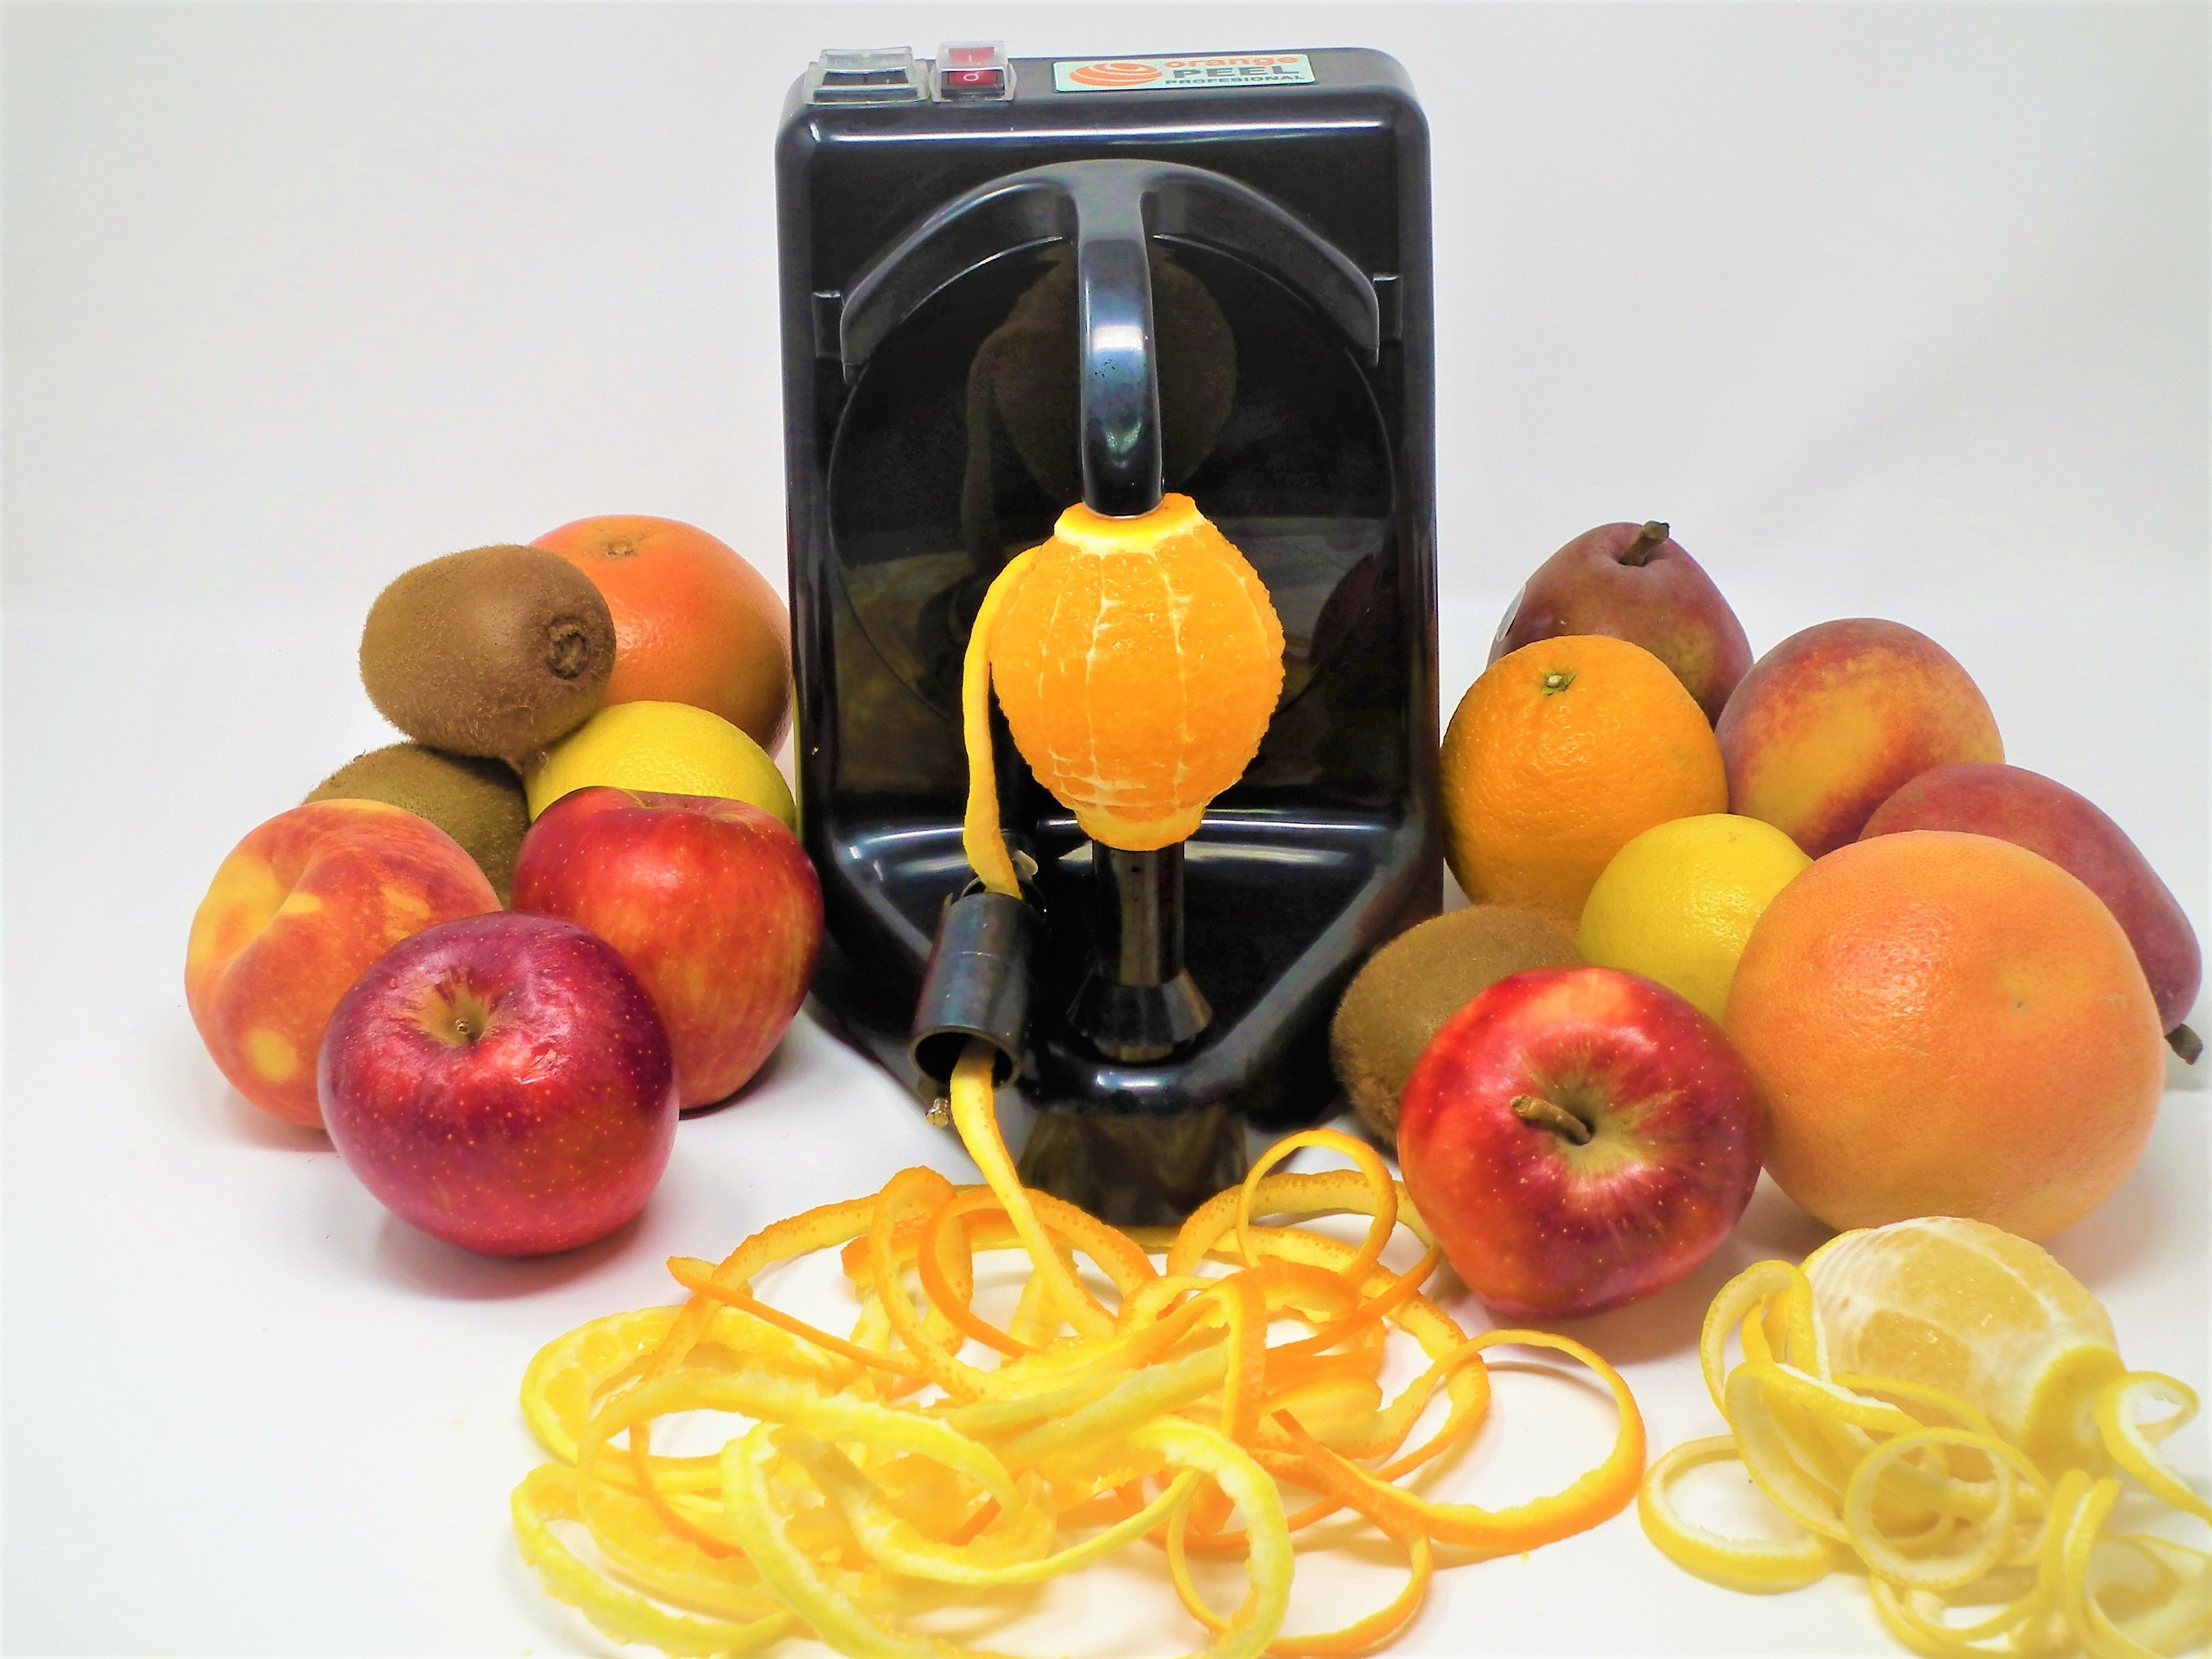 14 Best Fruit and Vegetable Peelers 2018 - Manual and Electric